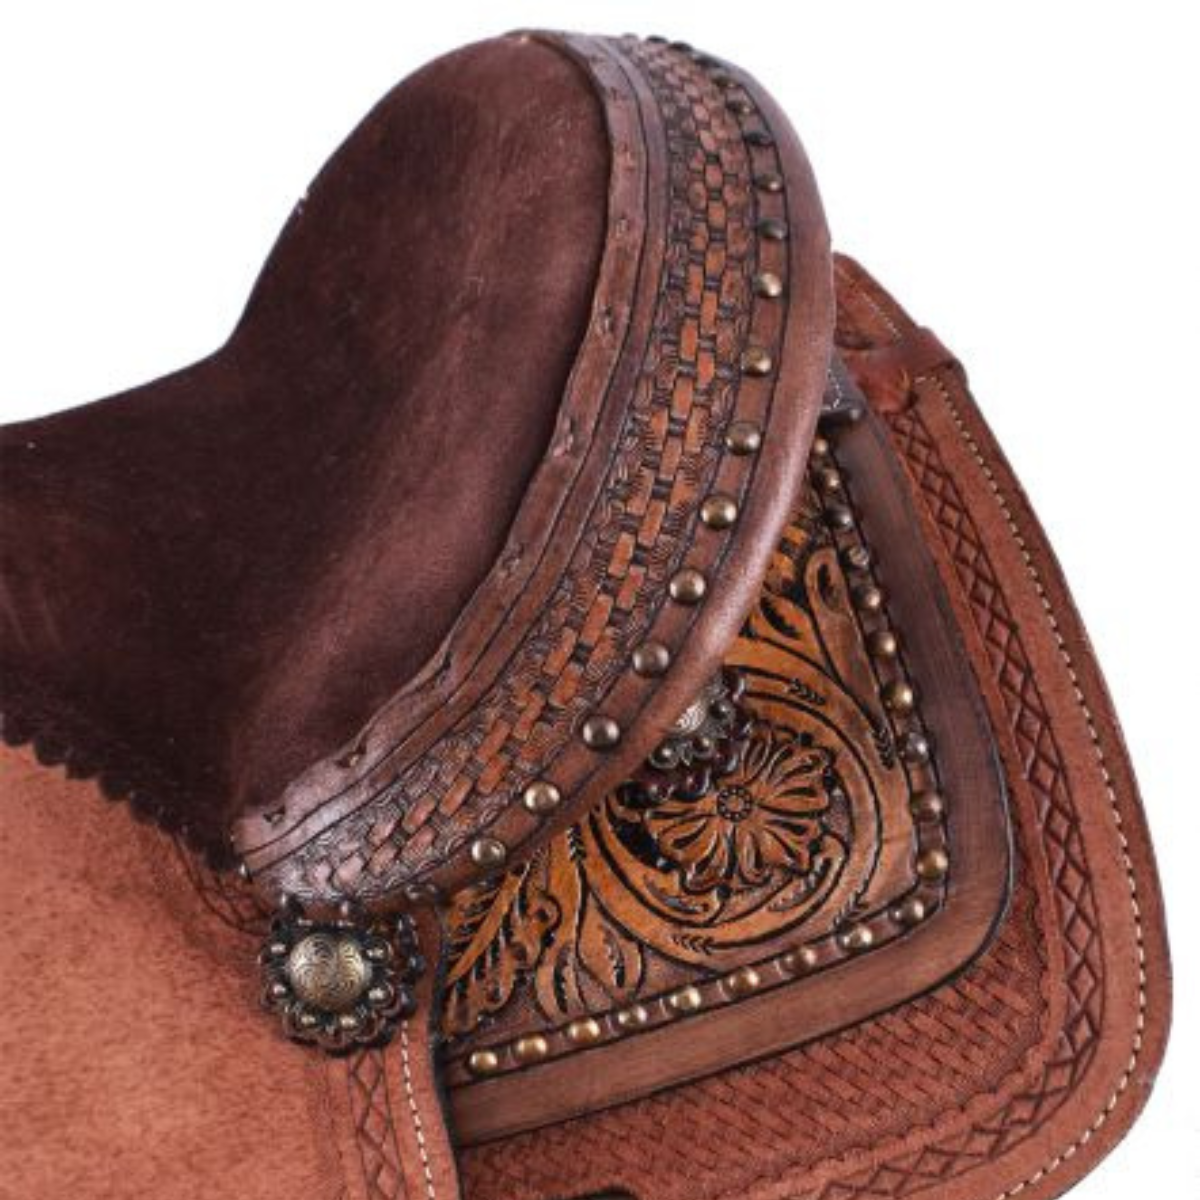 10" DOUBLE T PONY SADDLE WITH FLORAL TOOLING - Double T Saddles